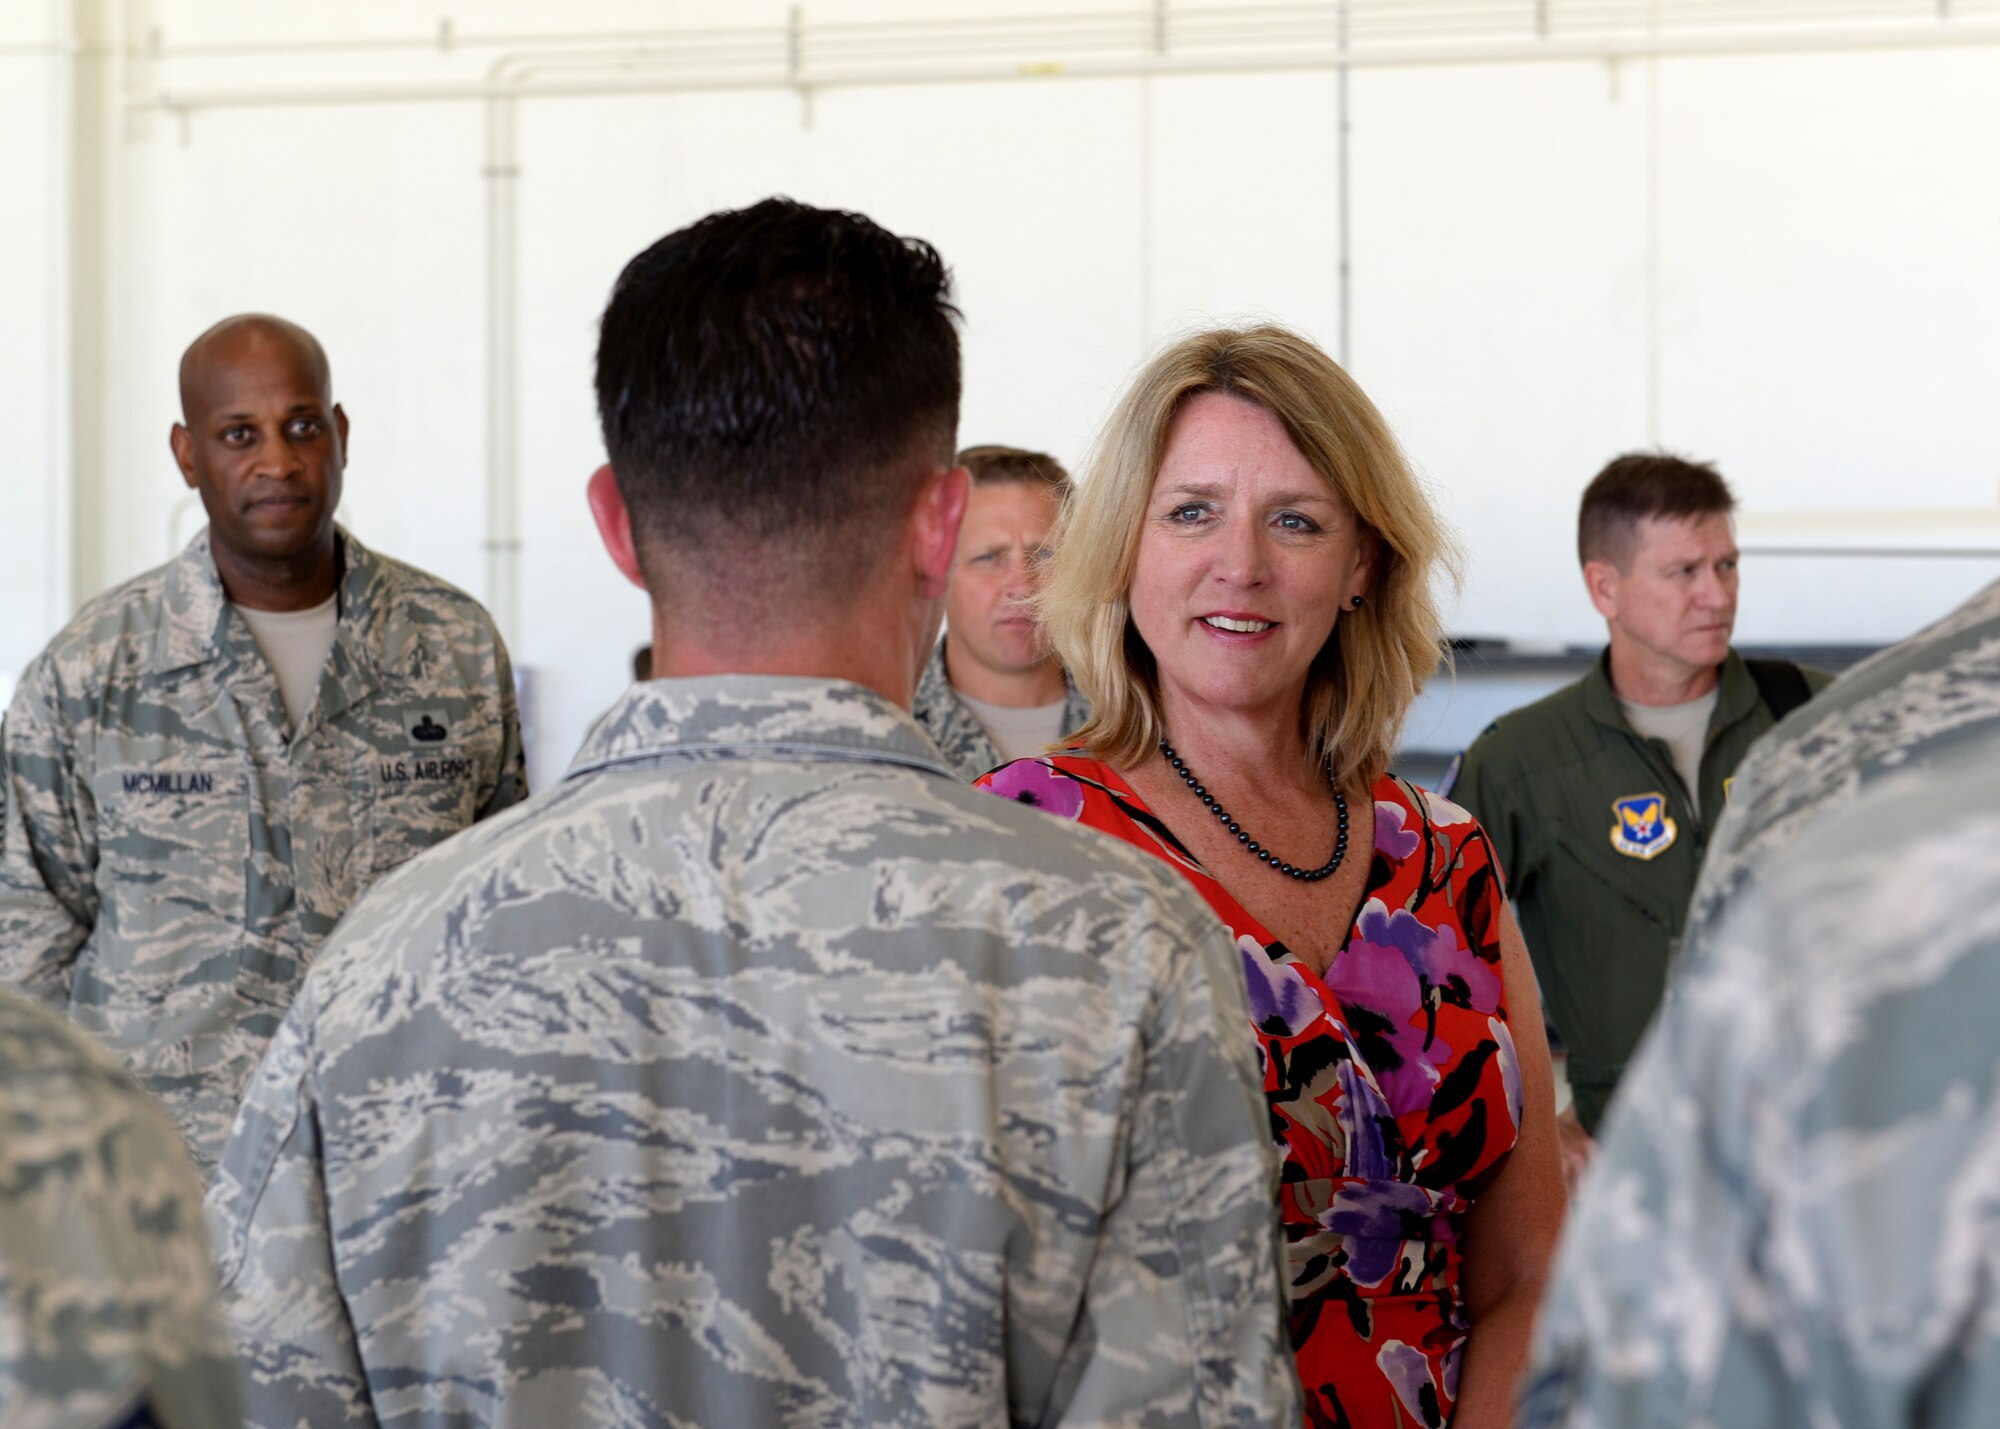 Secretary of the Air Force Deborah Lee James learns about RQ-4A Global Hawk mission capabilities from talking with 69th Reconnaissance Squadron, Detachment 2 Airmen Nov. 19, 2014, at Andersen Air Force Base, Guam. The Secretary met and discussed Air Force policies and goals with Airmen and local community leaders during her two-day visit to Andersen and received a first-hand look at the base's critical role in the strategic Pacific rebalance.  (U.S. Air Force photo by Airman 1st Class Amanda Morris/Released)